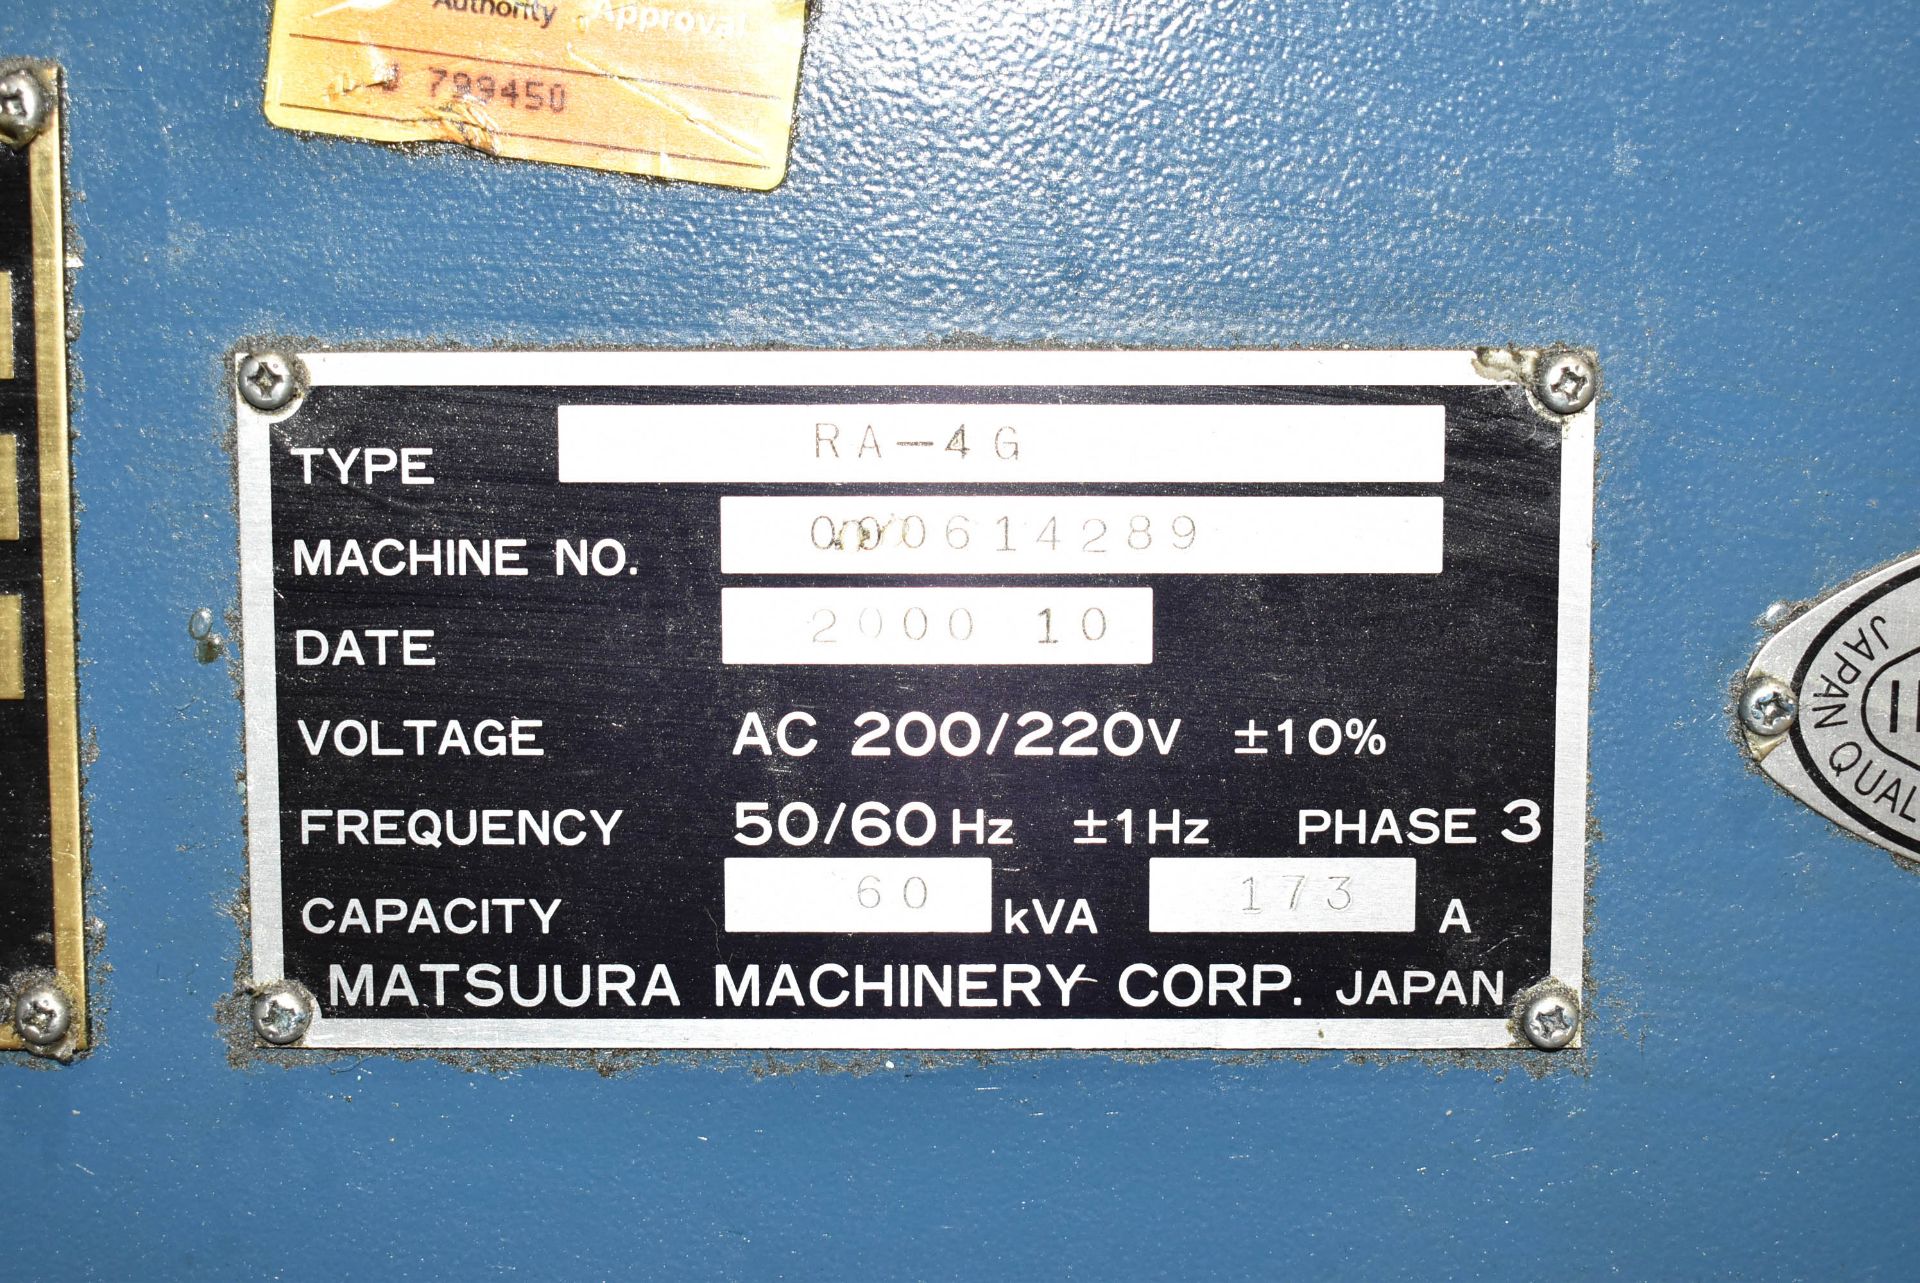 MATSUURA (2000) RA-4G TWIN-PALLET HIGH-SPEED CNC VERTICAL MACHINING CENTER WITH YASNAC CNC - Image 12 of 12